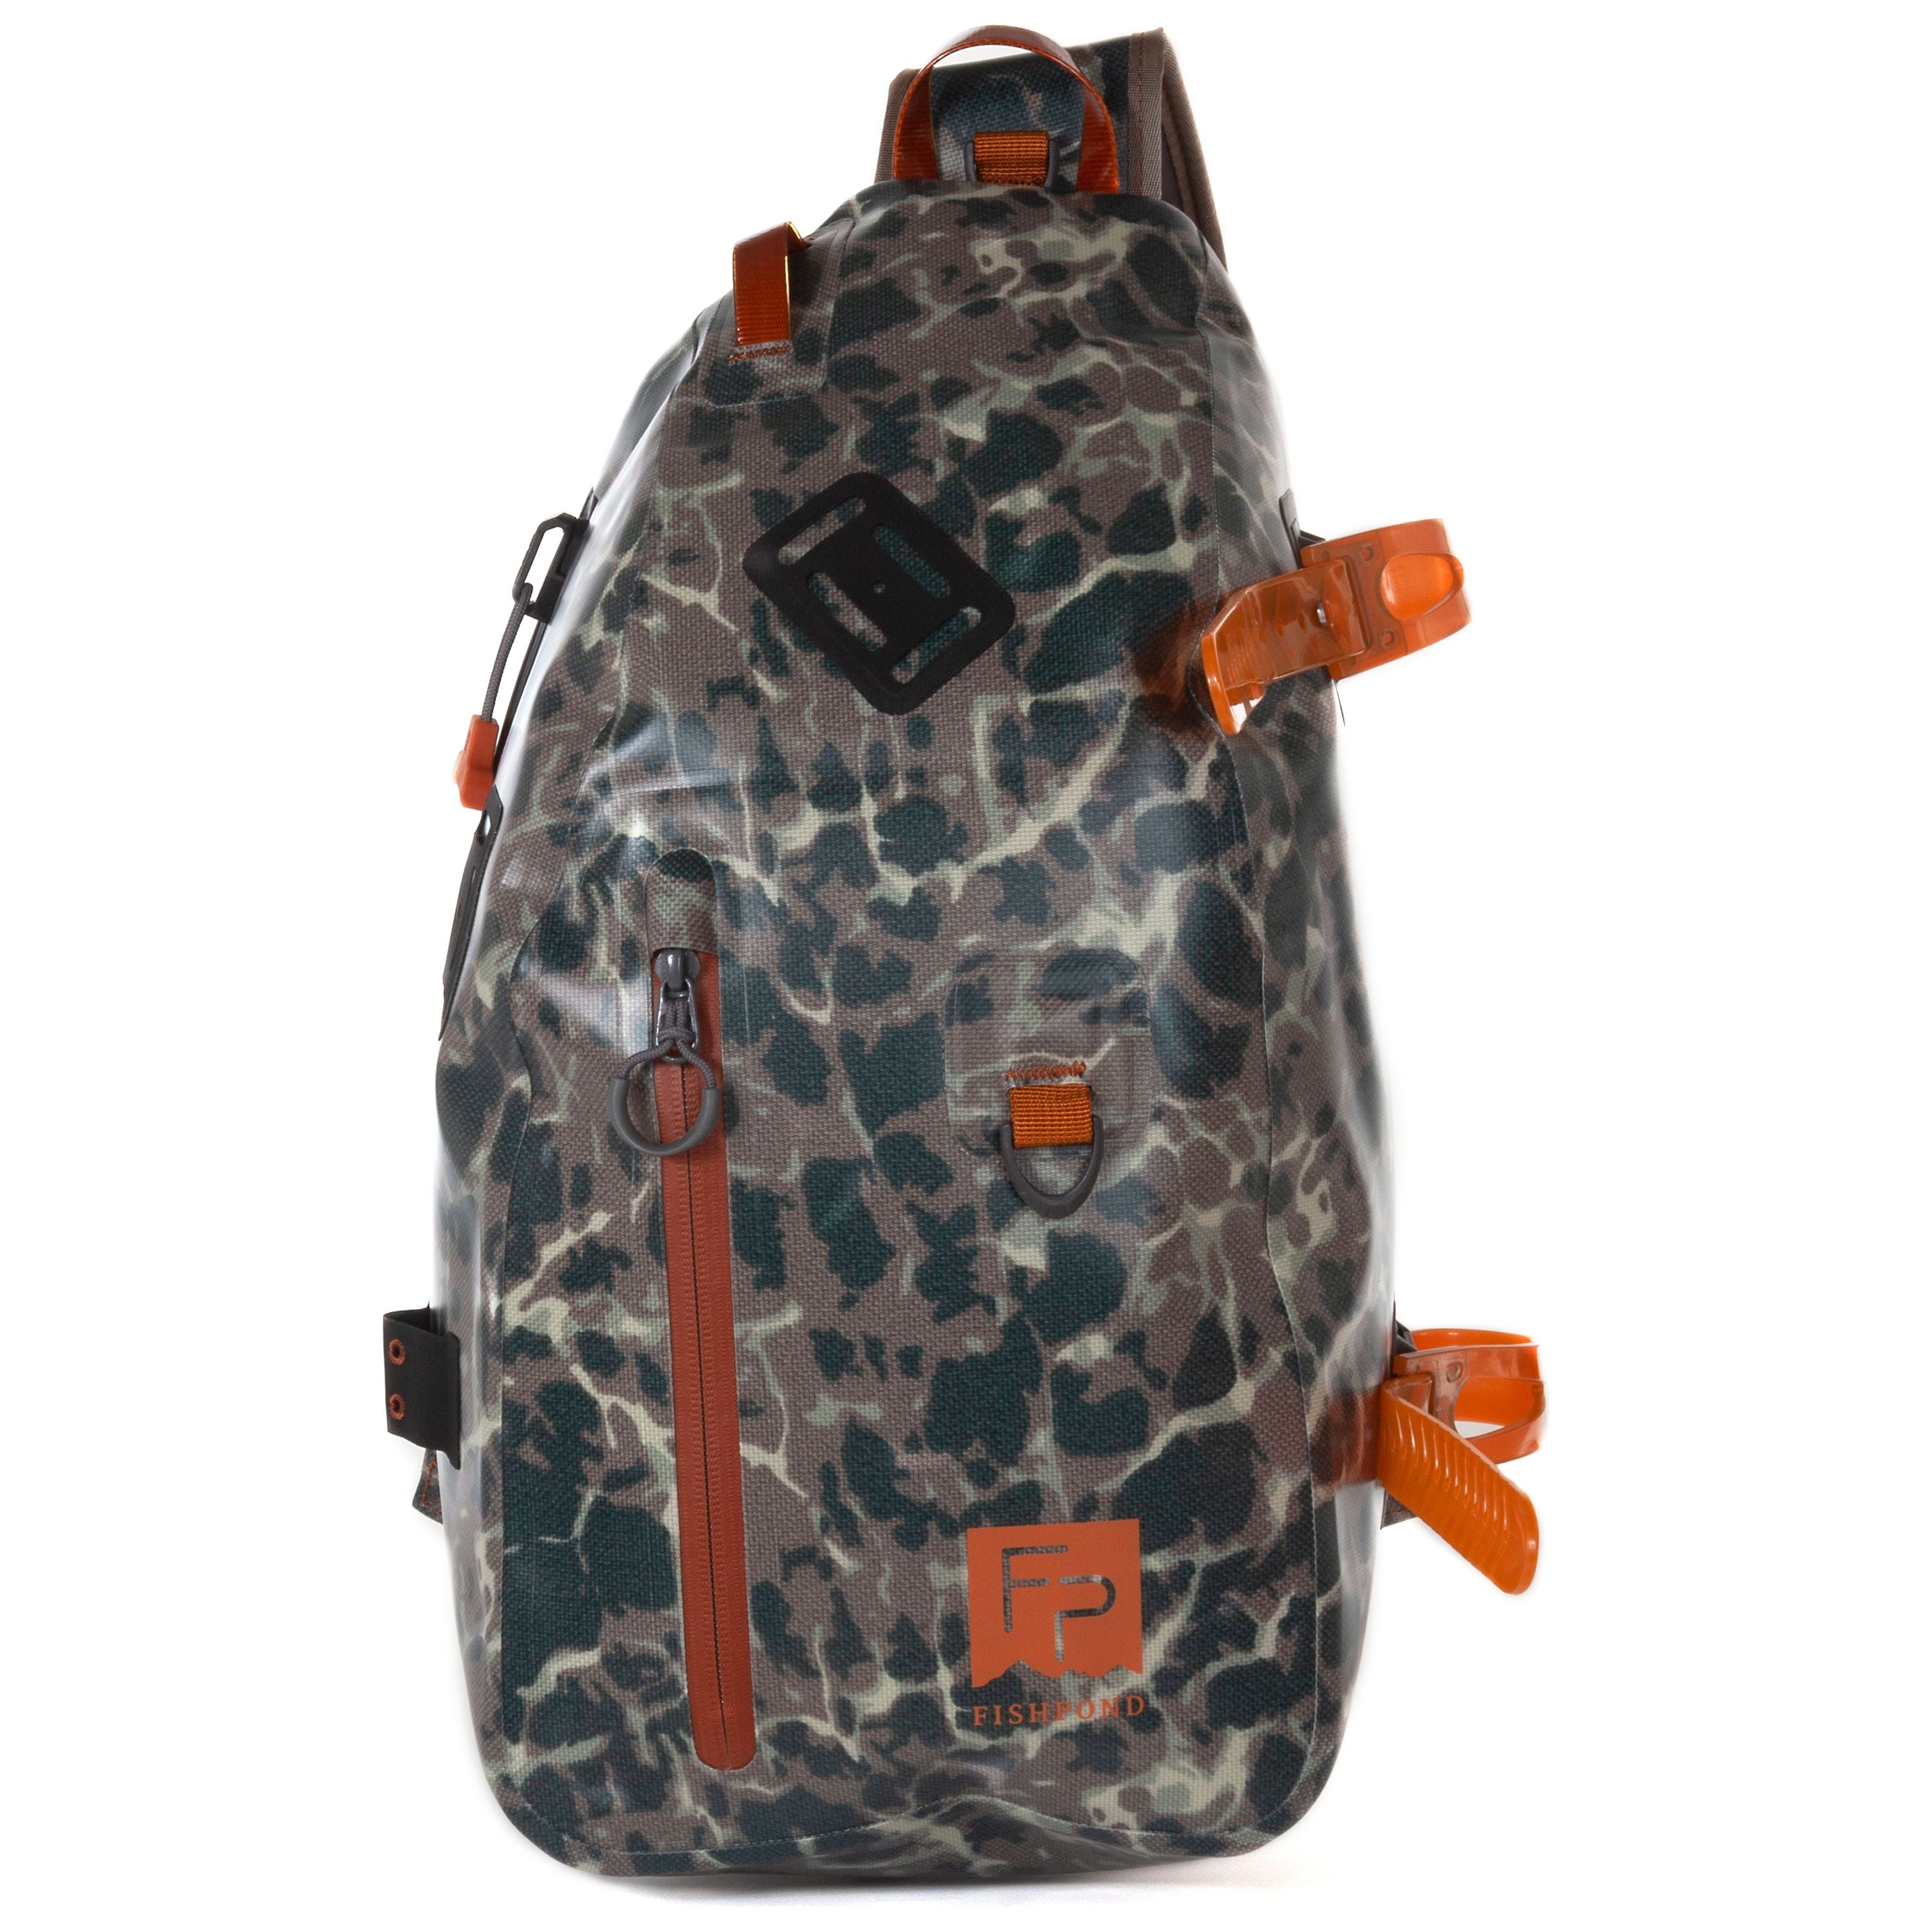 Fishpond Thunderhead Submersible Sling Eco Riverbed Camo Image 01